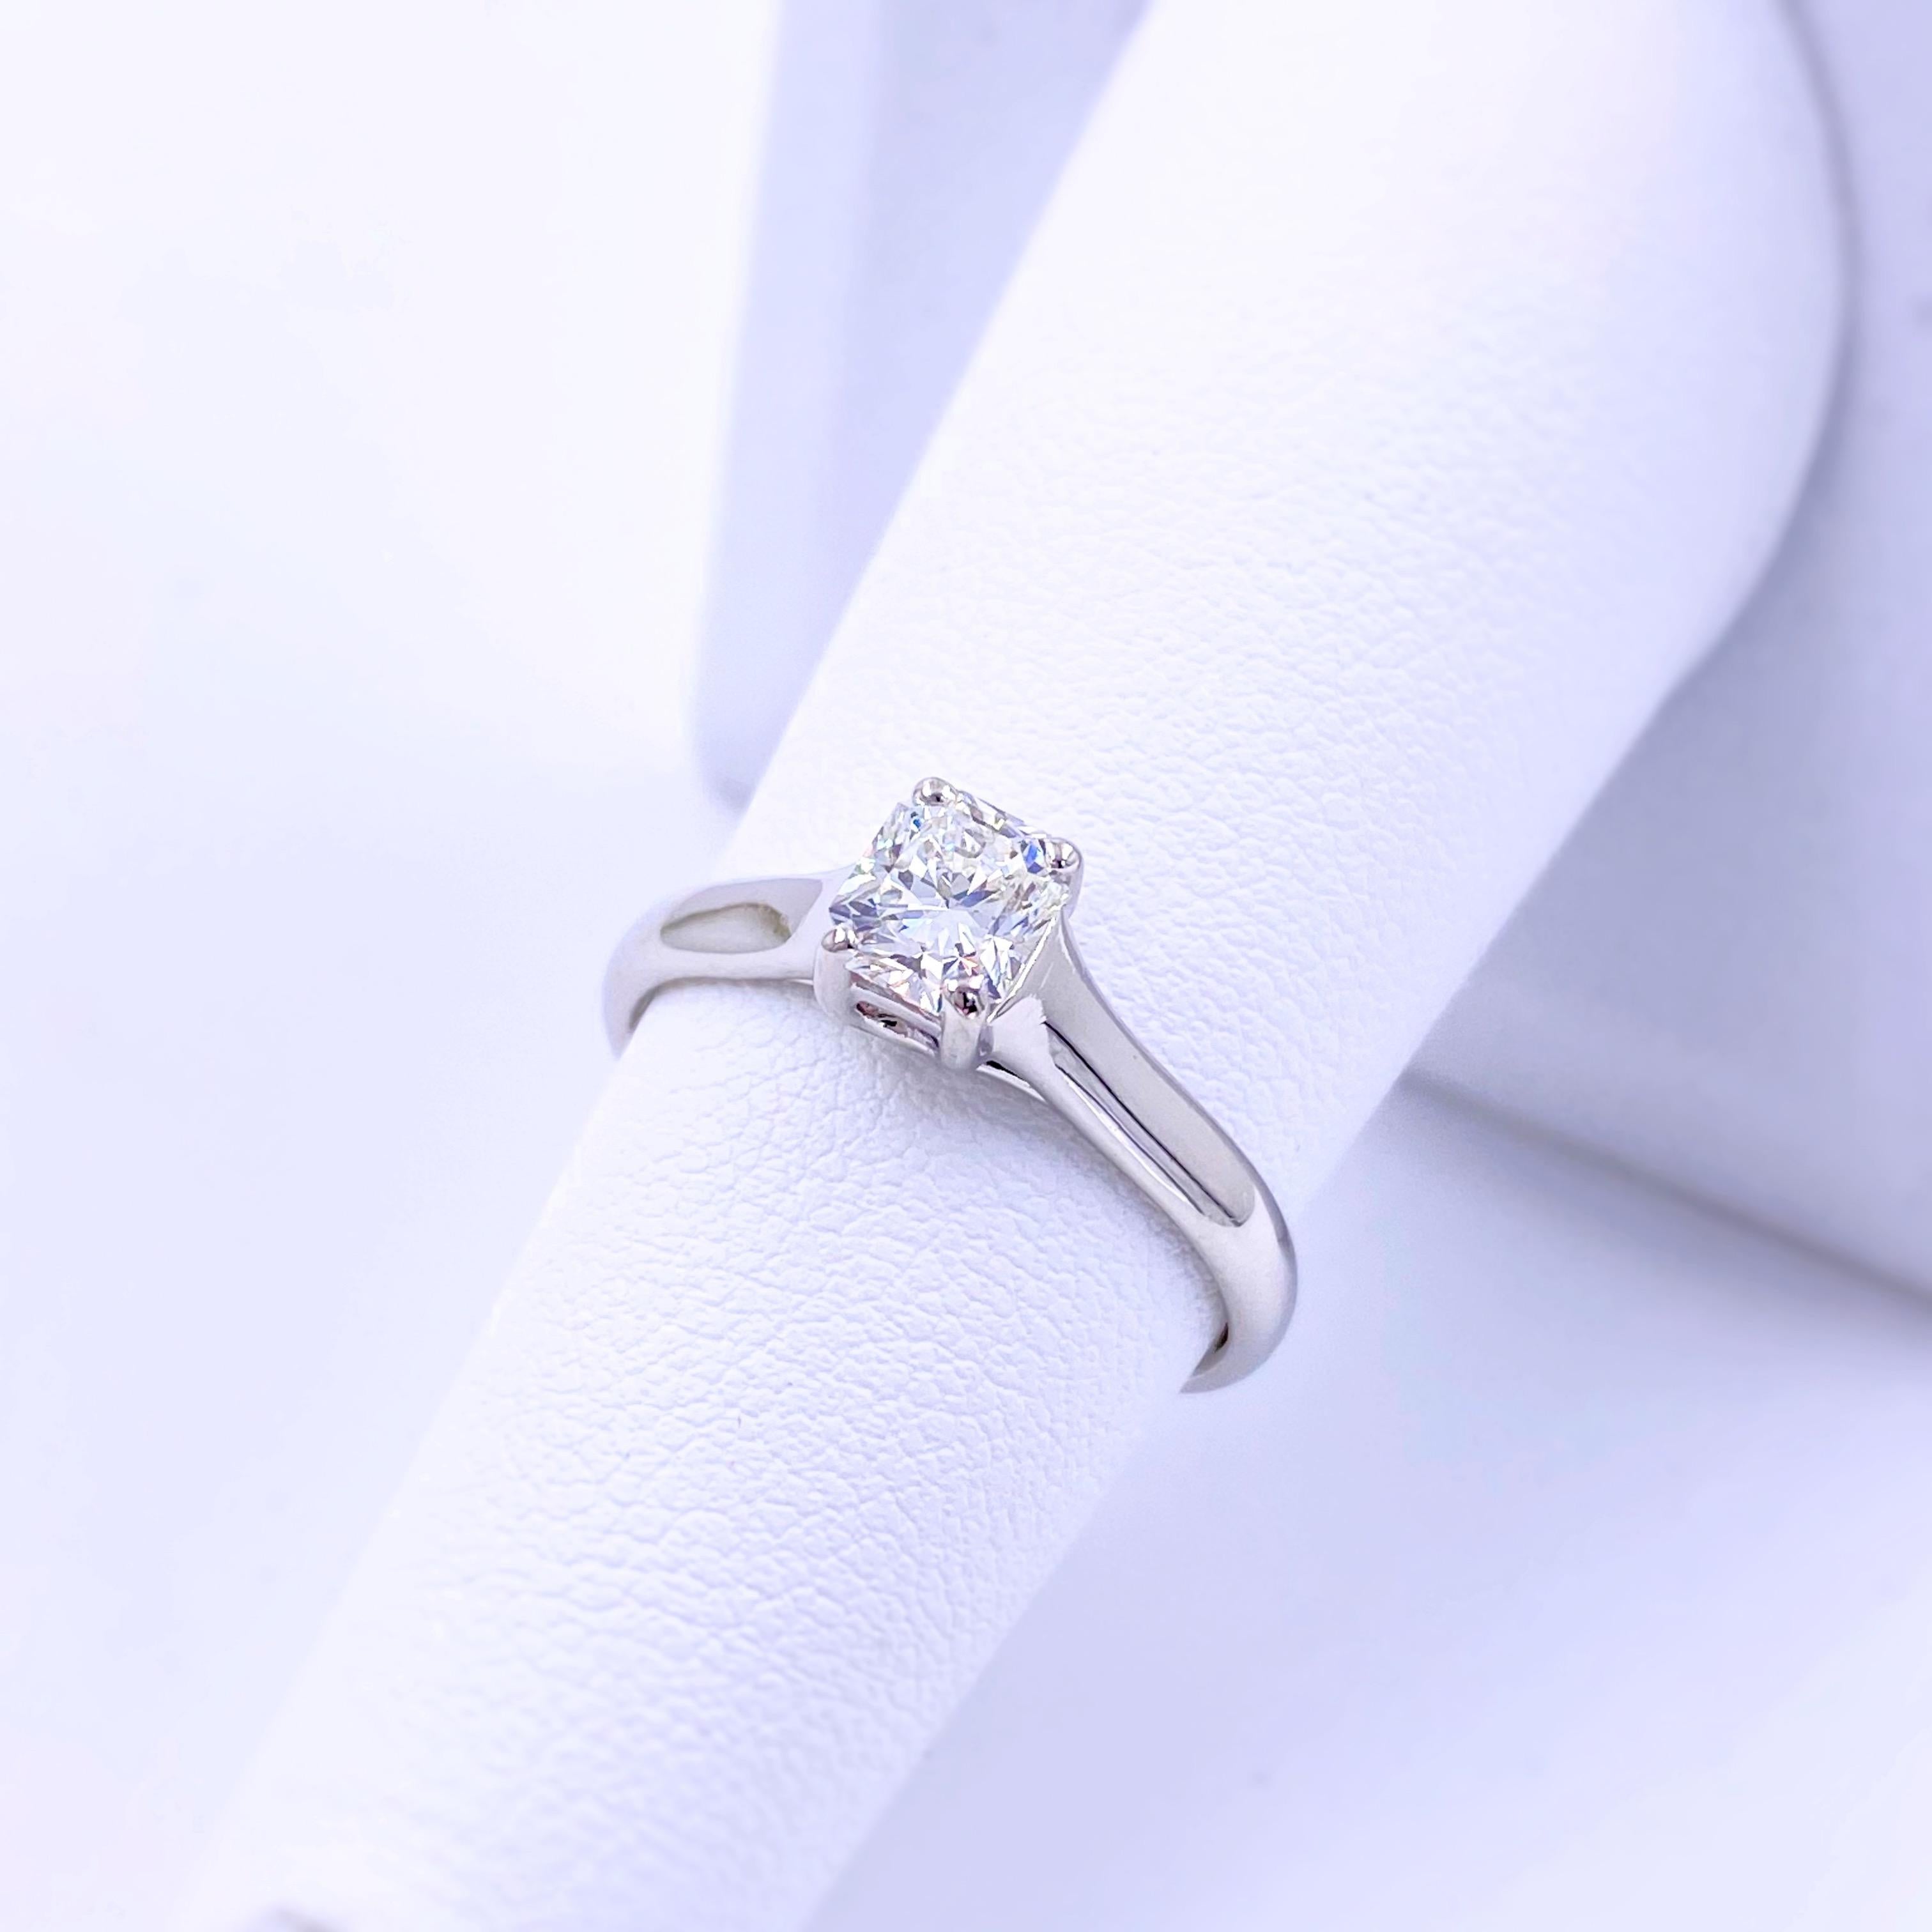 Tiffany & Co Lucida Solitaire Engagement Ring
Style:  Lucida Solitaire
Ref. number:  18778041/D463315
Certificate:  GIA 6214359665
Metal:  Platinum PT950
Size:  6.5 sizable
TCW:  0.58 cts
Main Diamond:   Lucida Cut
Color & Clarity:  F / VS1